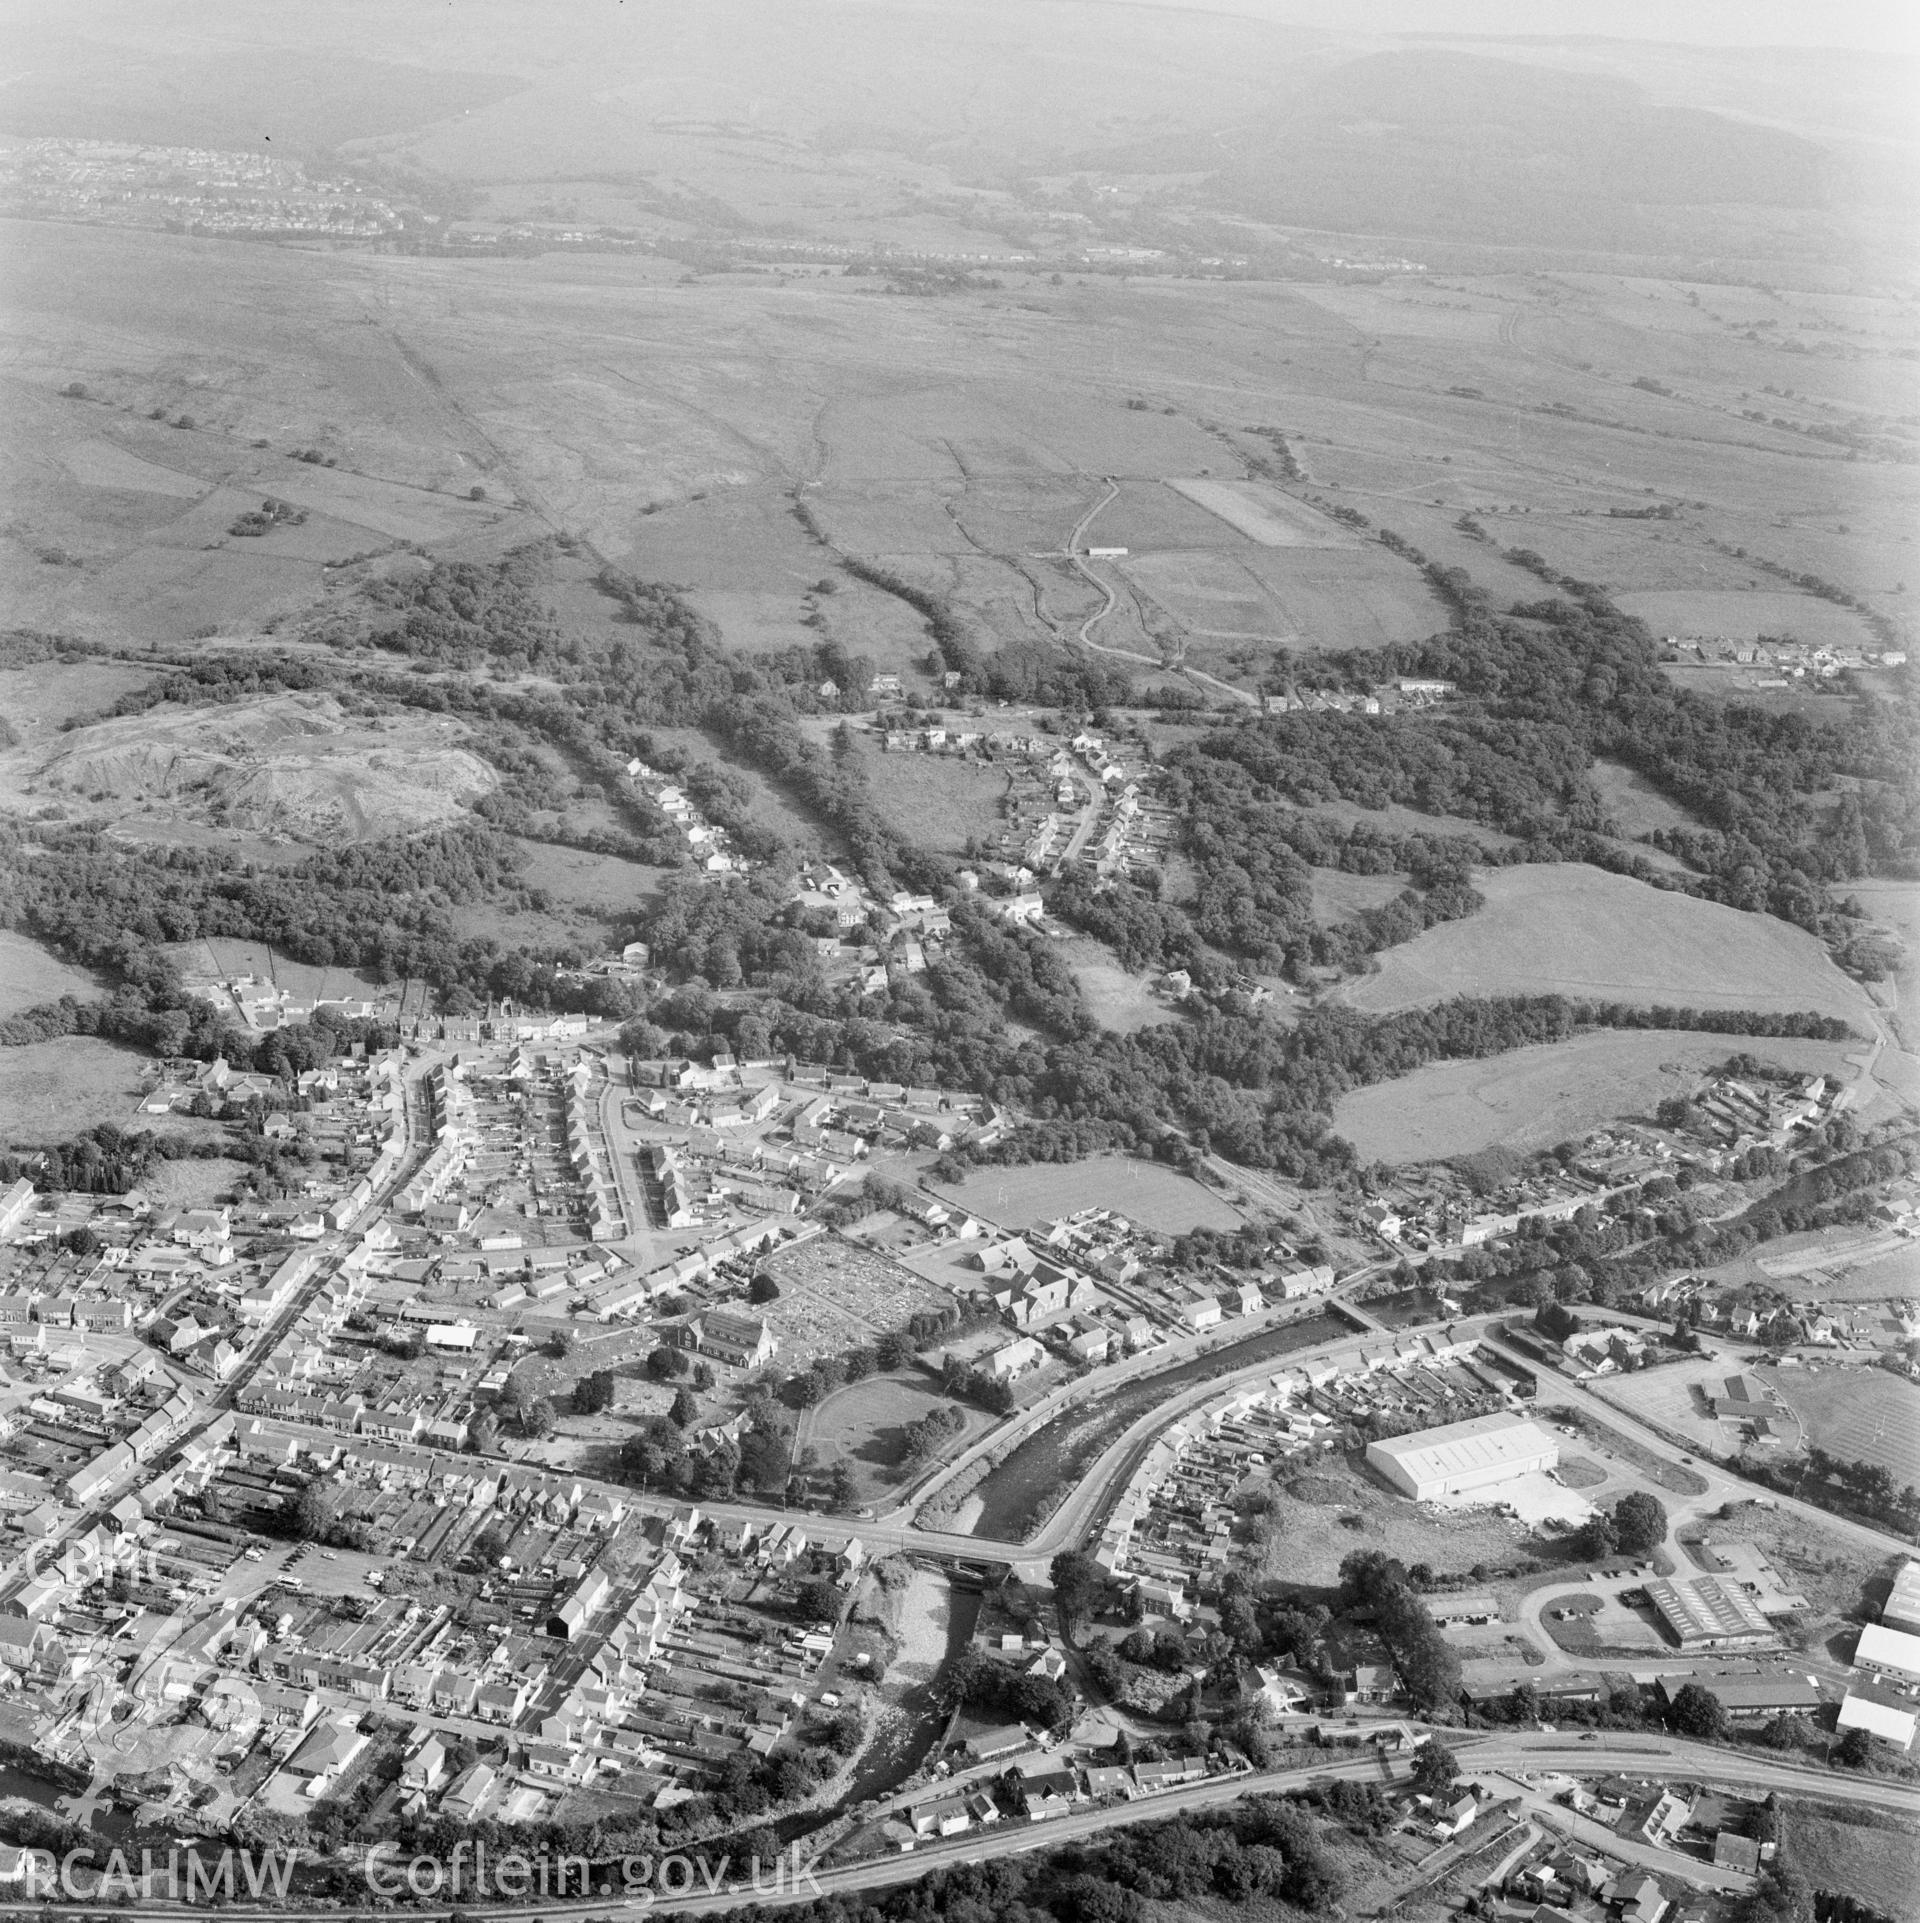 RCAHMW Black and white oblique aerial photograph of Ynysgedwyn Incline on the Brecon Forest Tramroad, Ystradgynlais, taken by CR Musson on 07/09/88